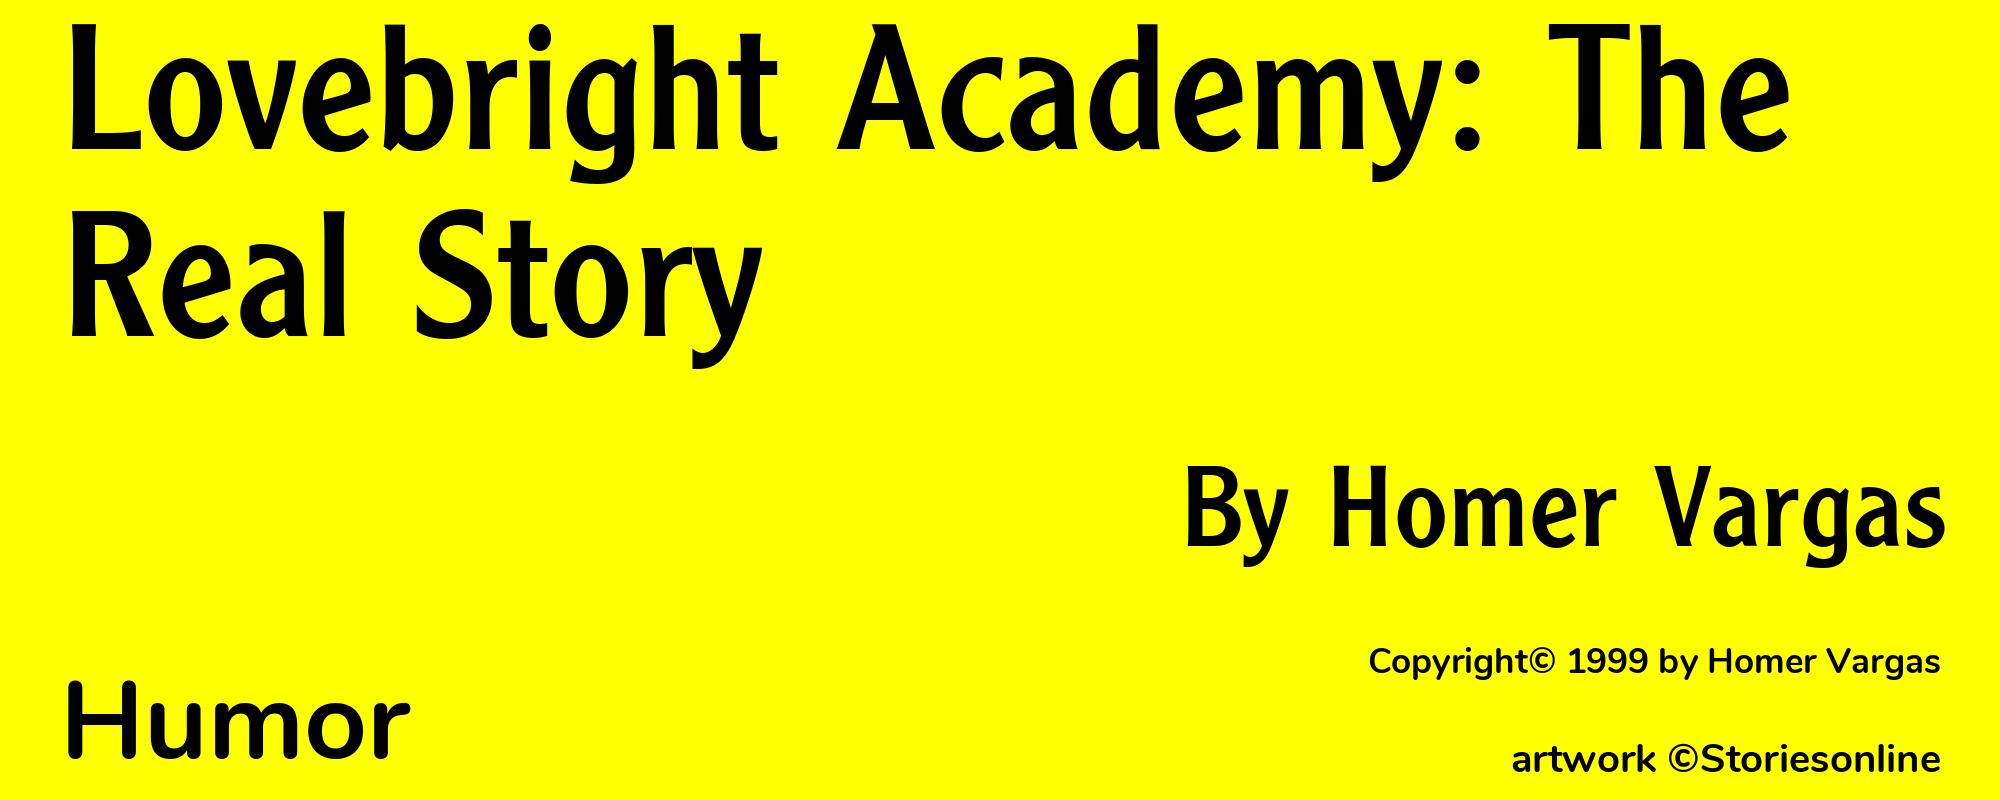 Lovebright Academy: The Real Story - Cover